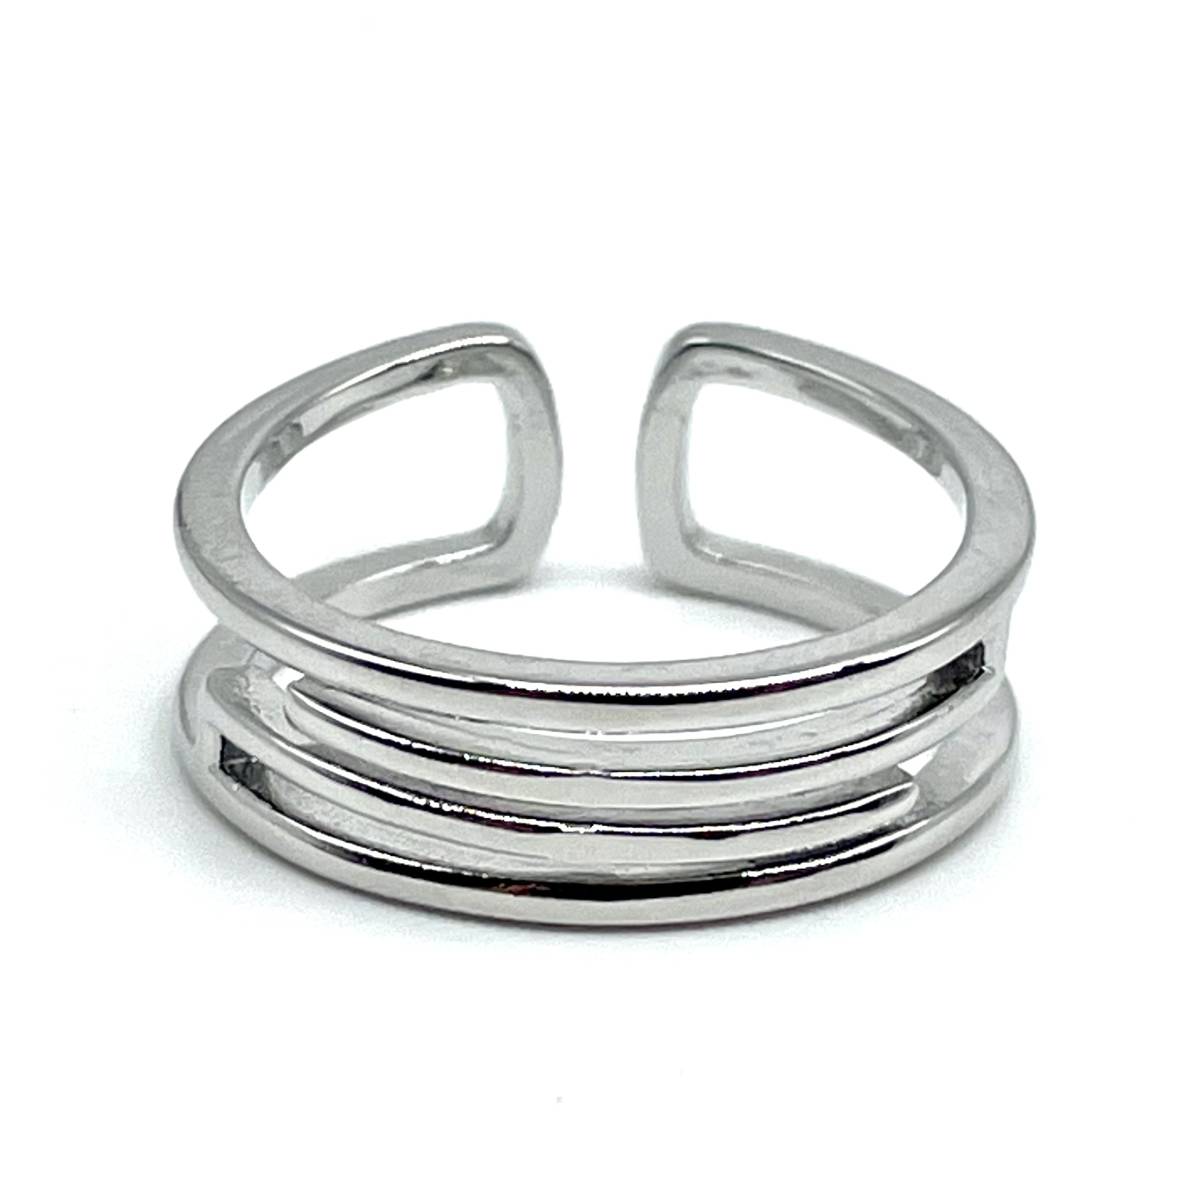  design open ring * ring men's silver silver 16 number new goods unused ring silver ring casual mode Korea [PN261-1]